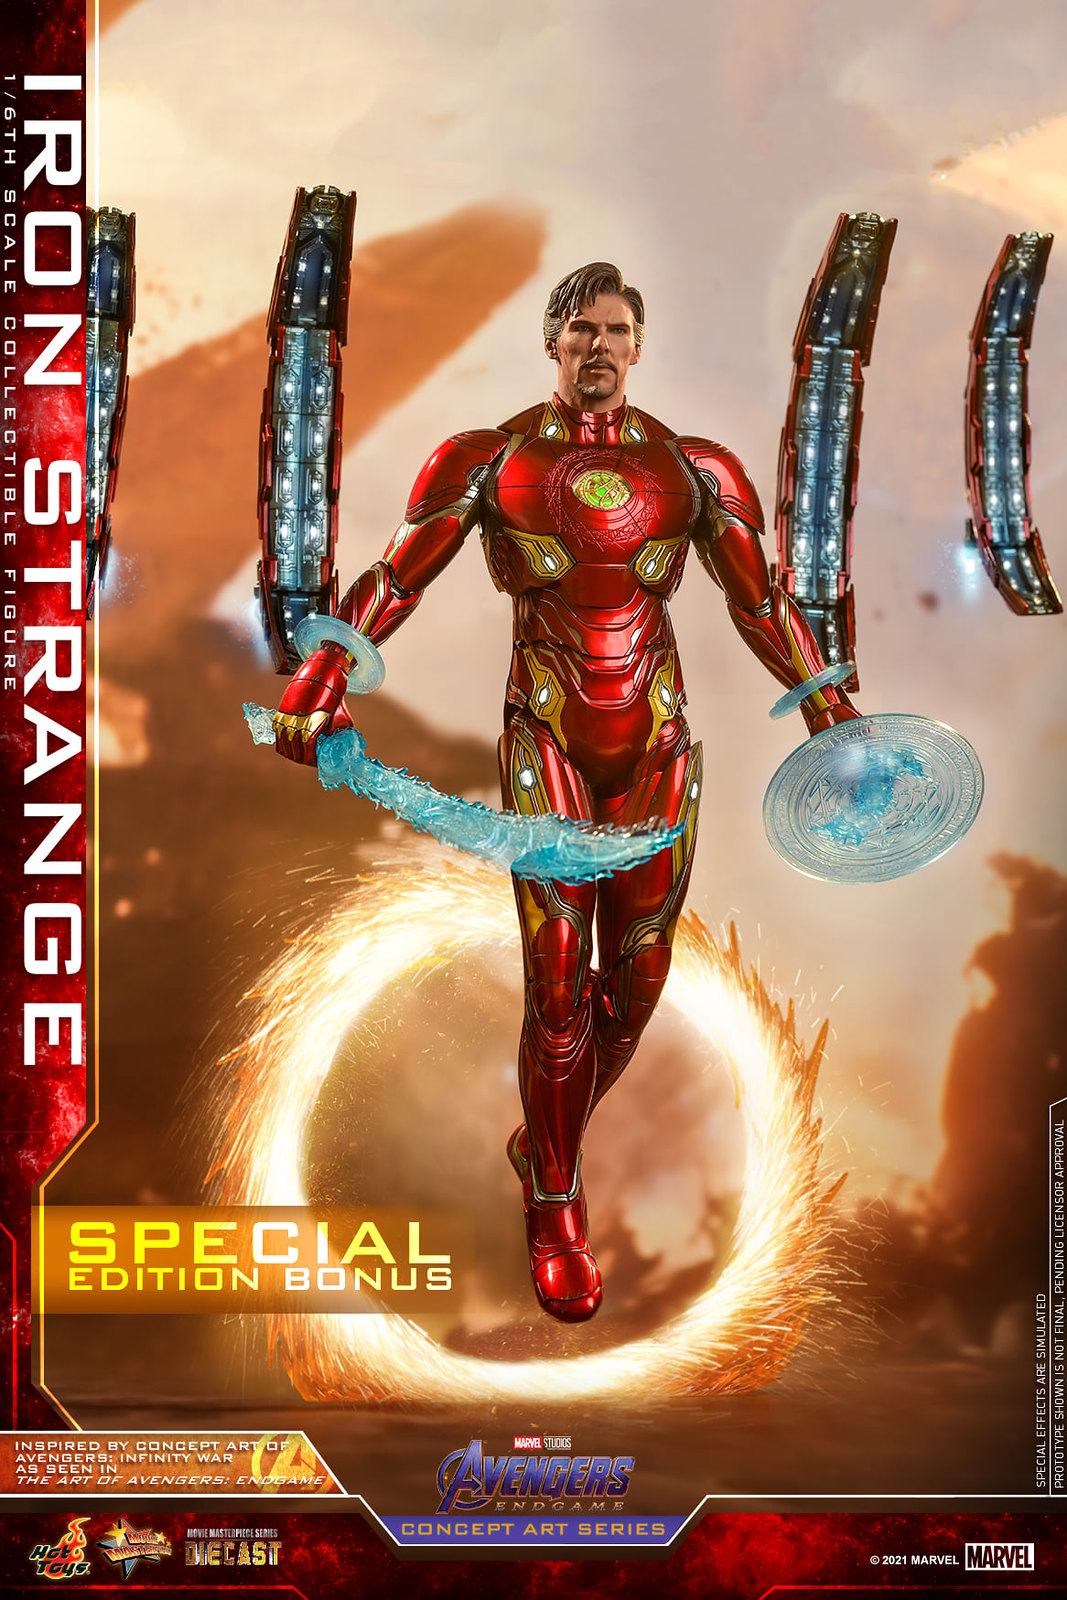 NEW PRODUCT: Hot Toys Avengers: Endgame (Concept Art Series) - 1/6th scale Iron Strange Collectible Figure 51311952114_cbb5f1c332_h